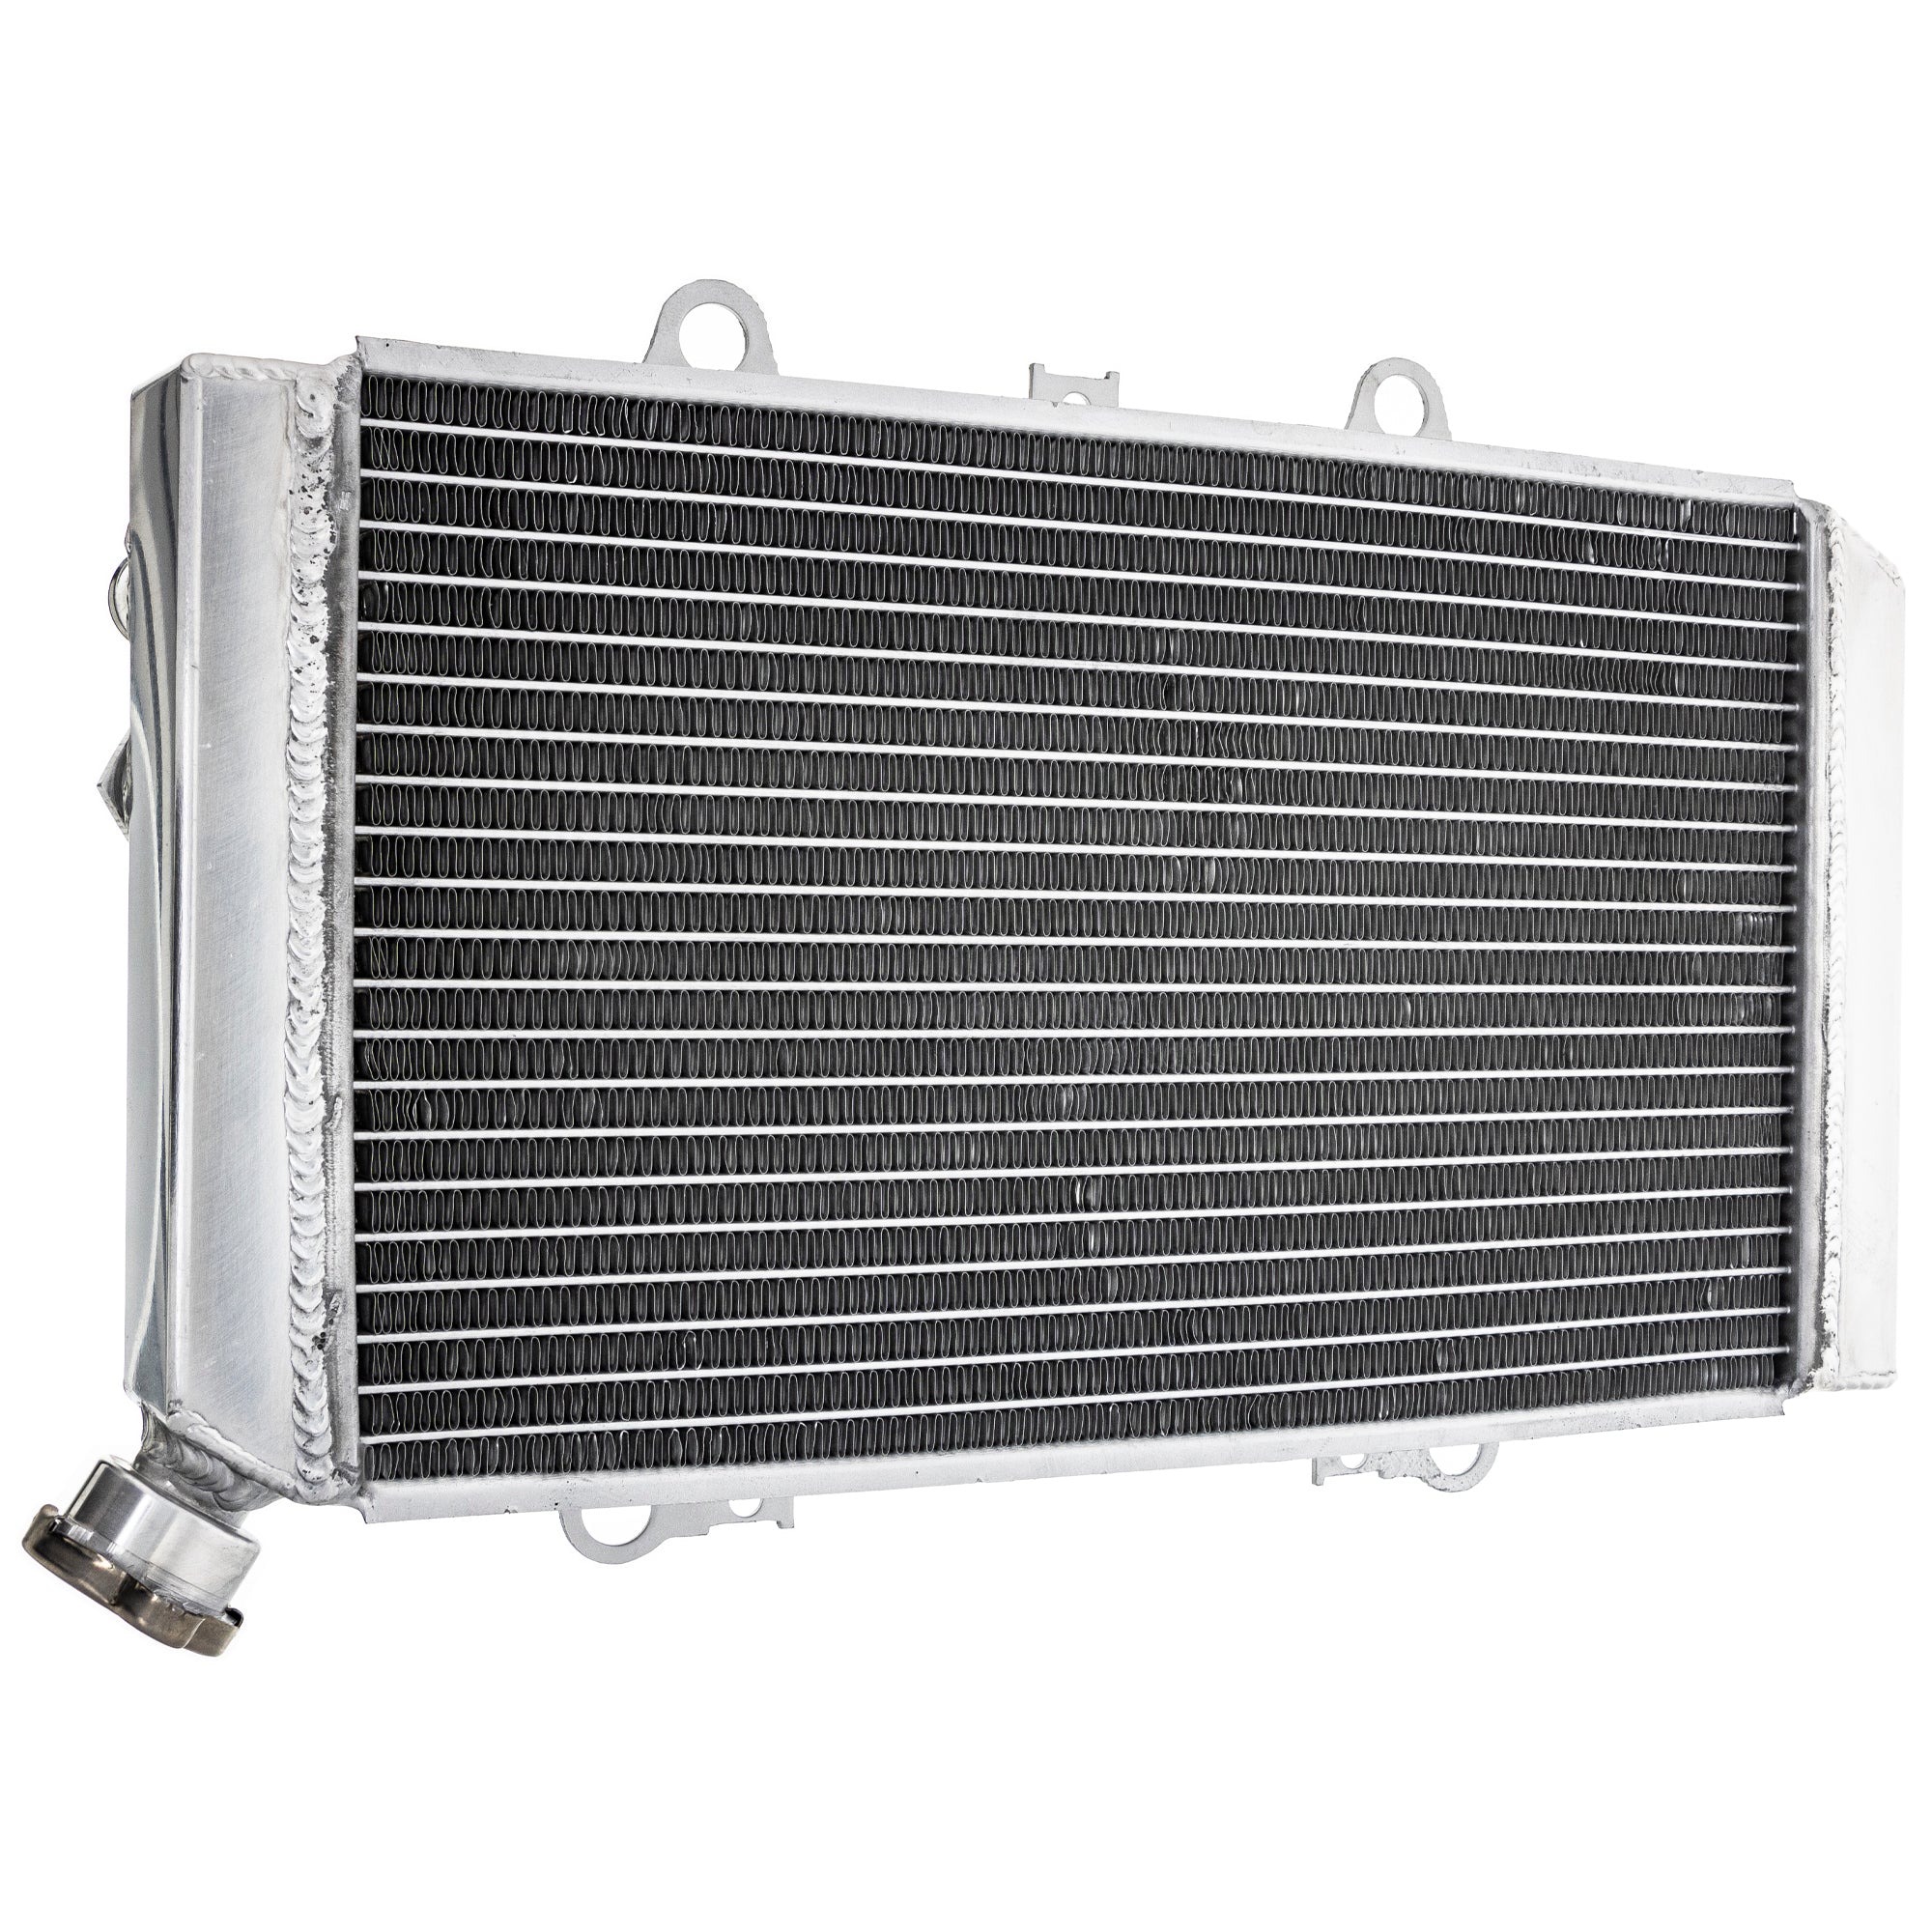 NICHE 519-CRD2224A High Capacity Radiator for Yamaha Grizzly